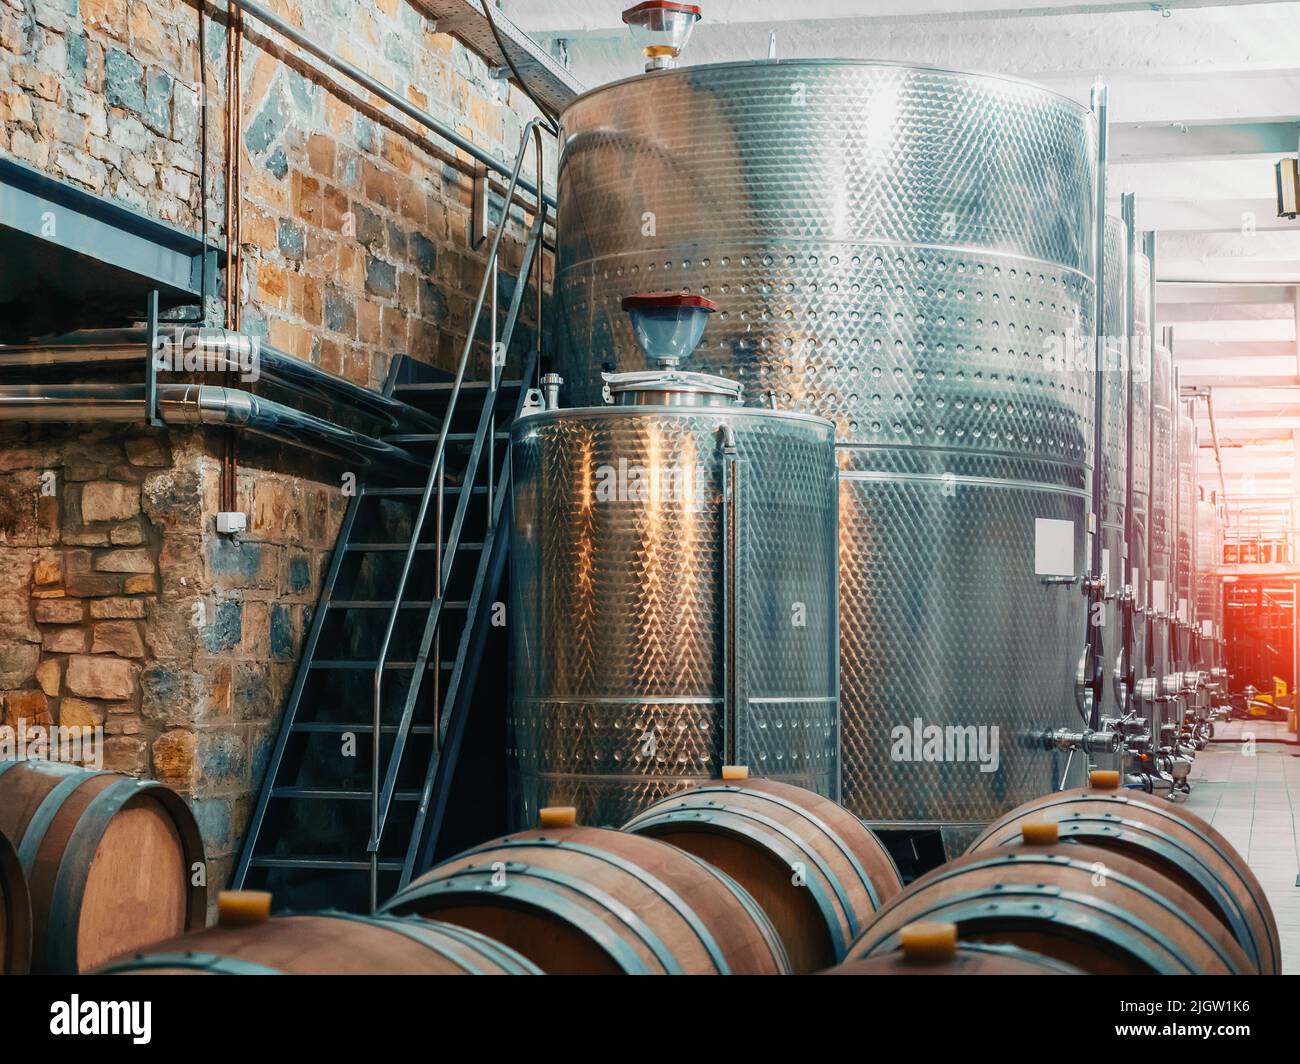 Winery factory with steel tanks for fermenting and wooden barrels for aging process, winemaking concept, food industry. Stock Photo